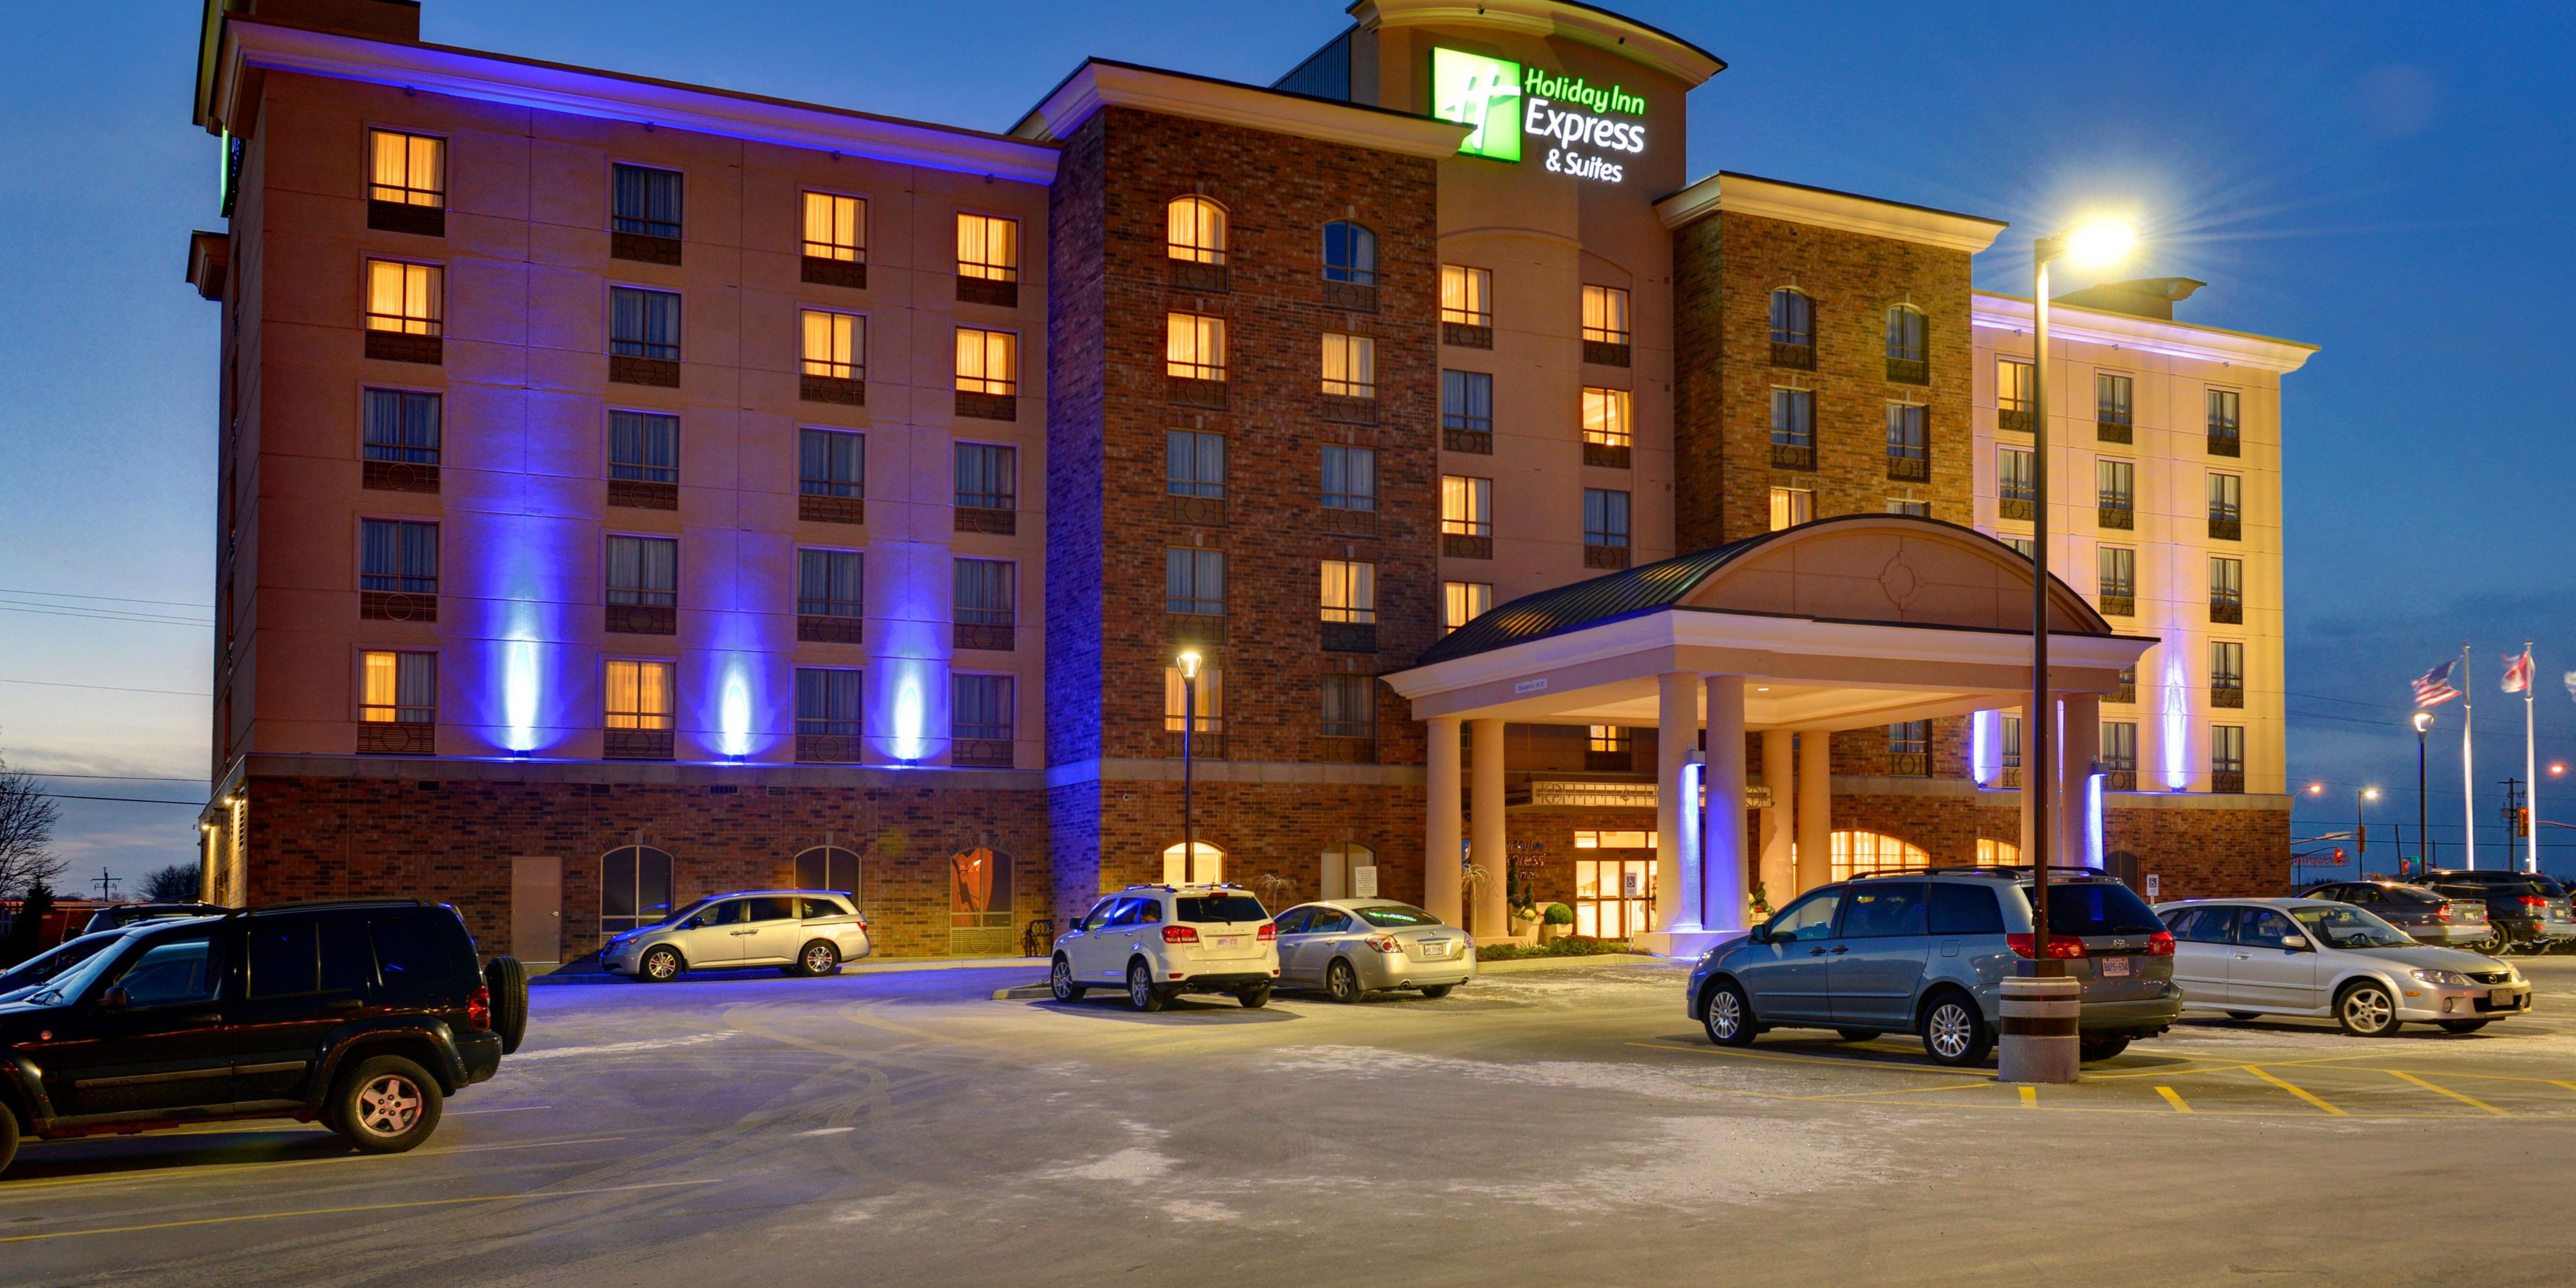 Holiday Inn Express & Suites Waterloo - St. Jacobs Area Map & Driving